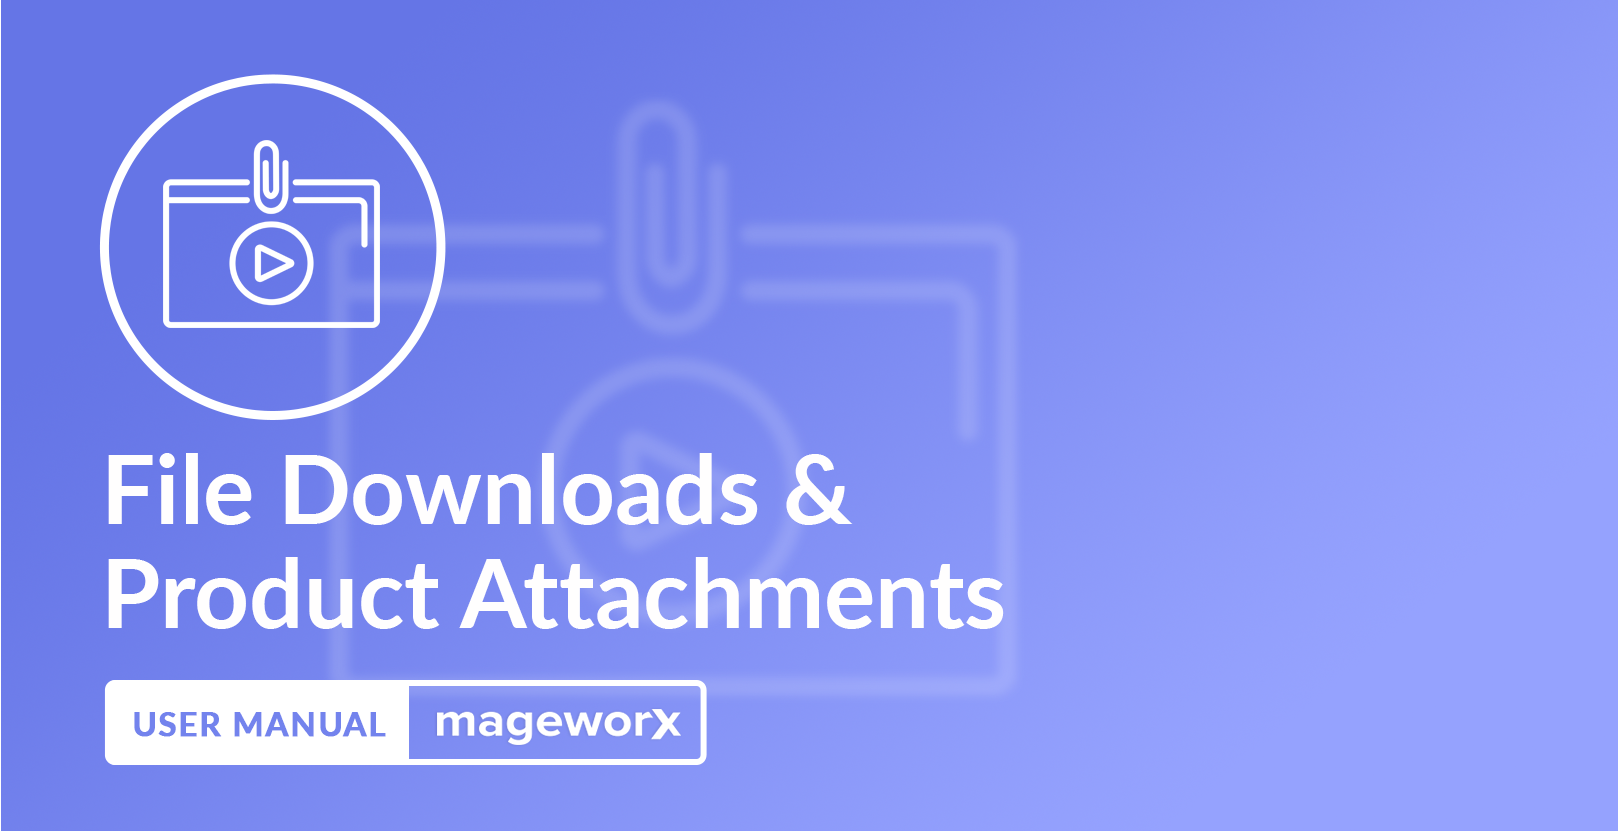 File Downloads and Product Attachments Cover